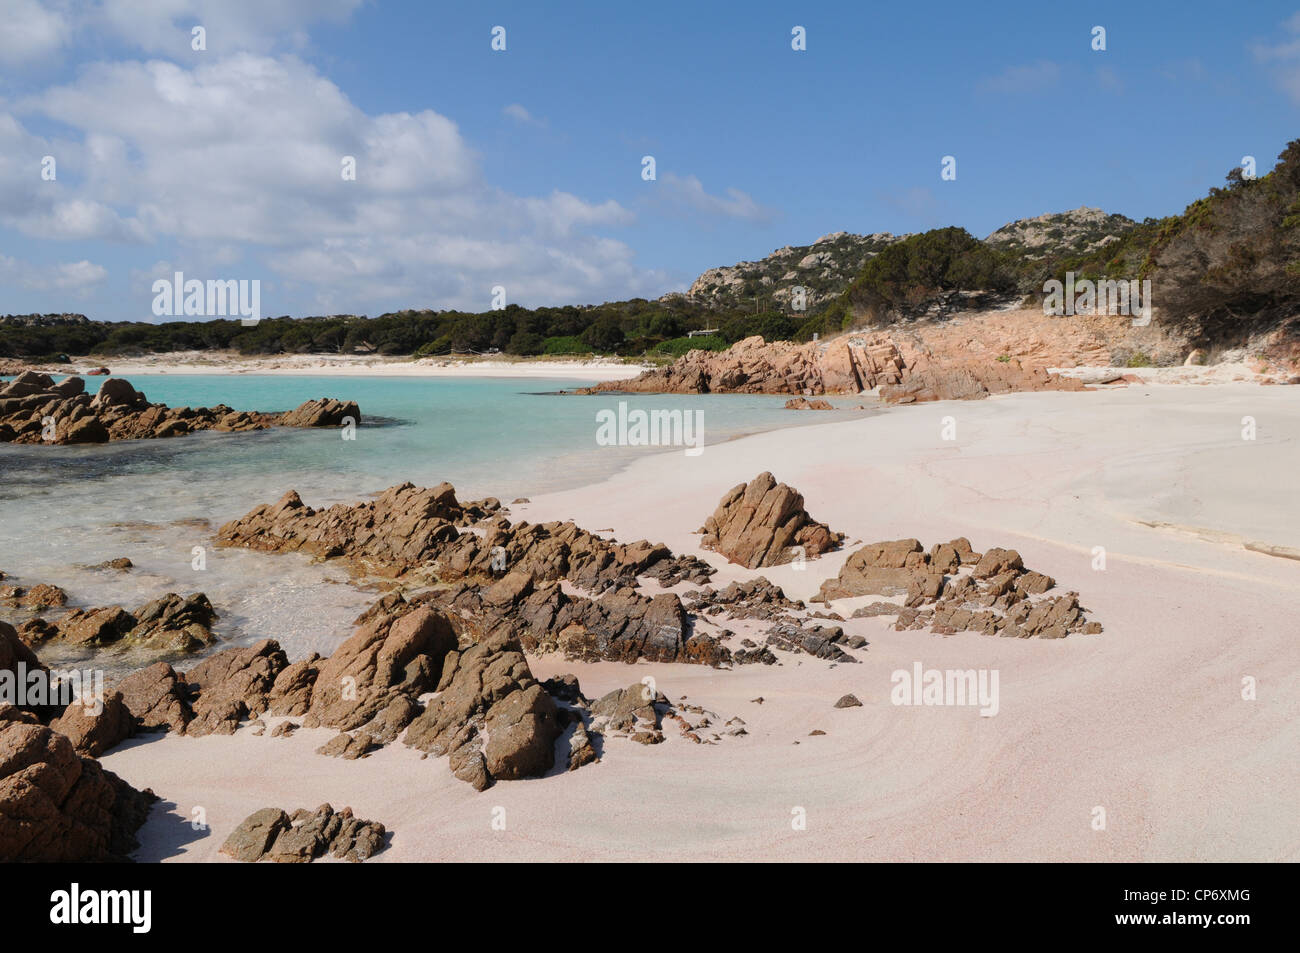 The view on the famous beach of Spiaggia rosa in to Budelli island in to the archipelago of  La Maddalena National park, Sardinia, Italy Stock Photo